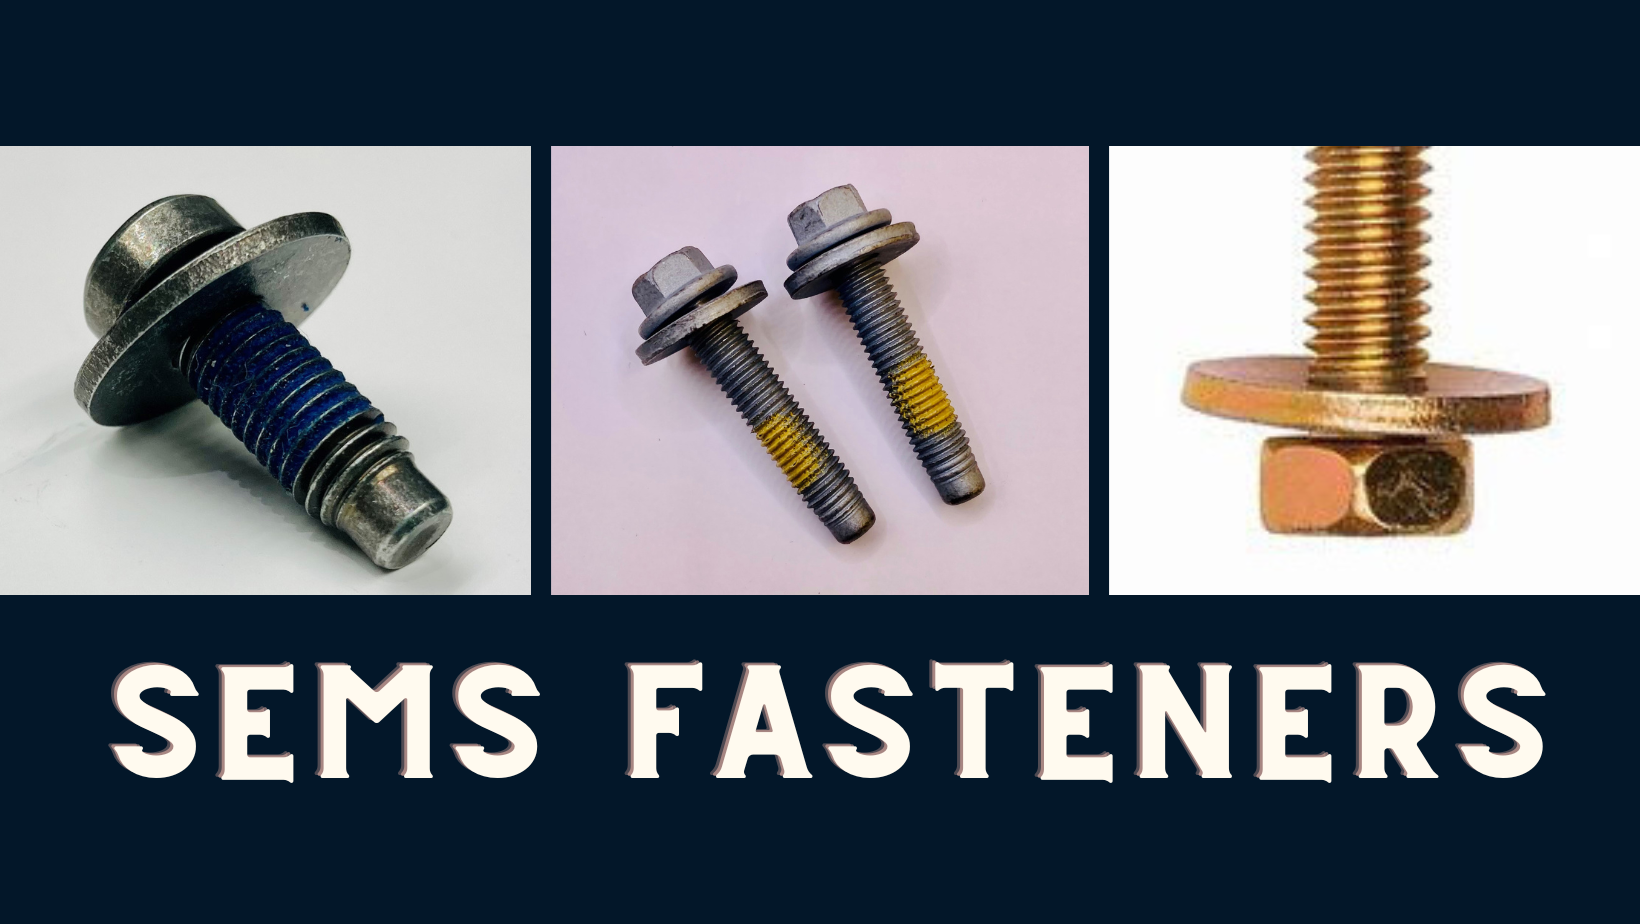 Three Types of SEMS Fasteners